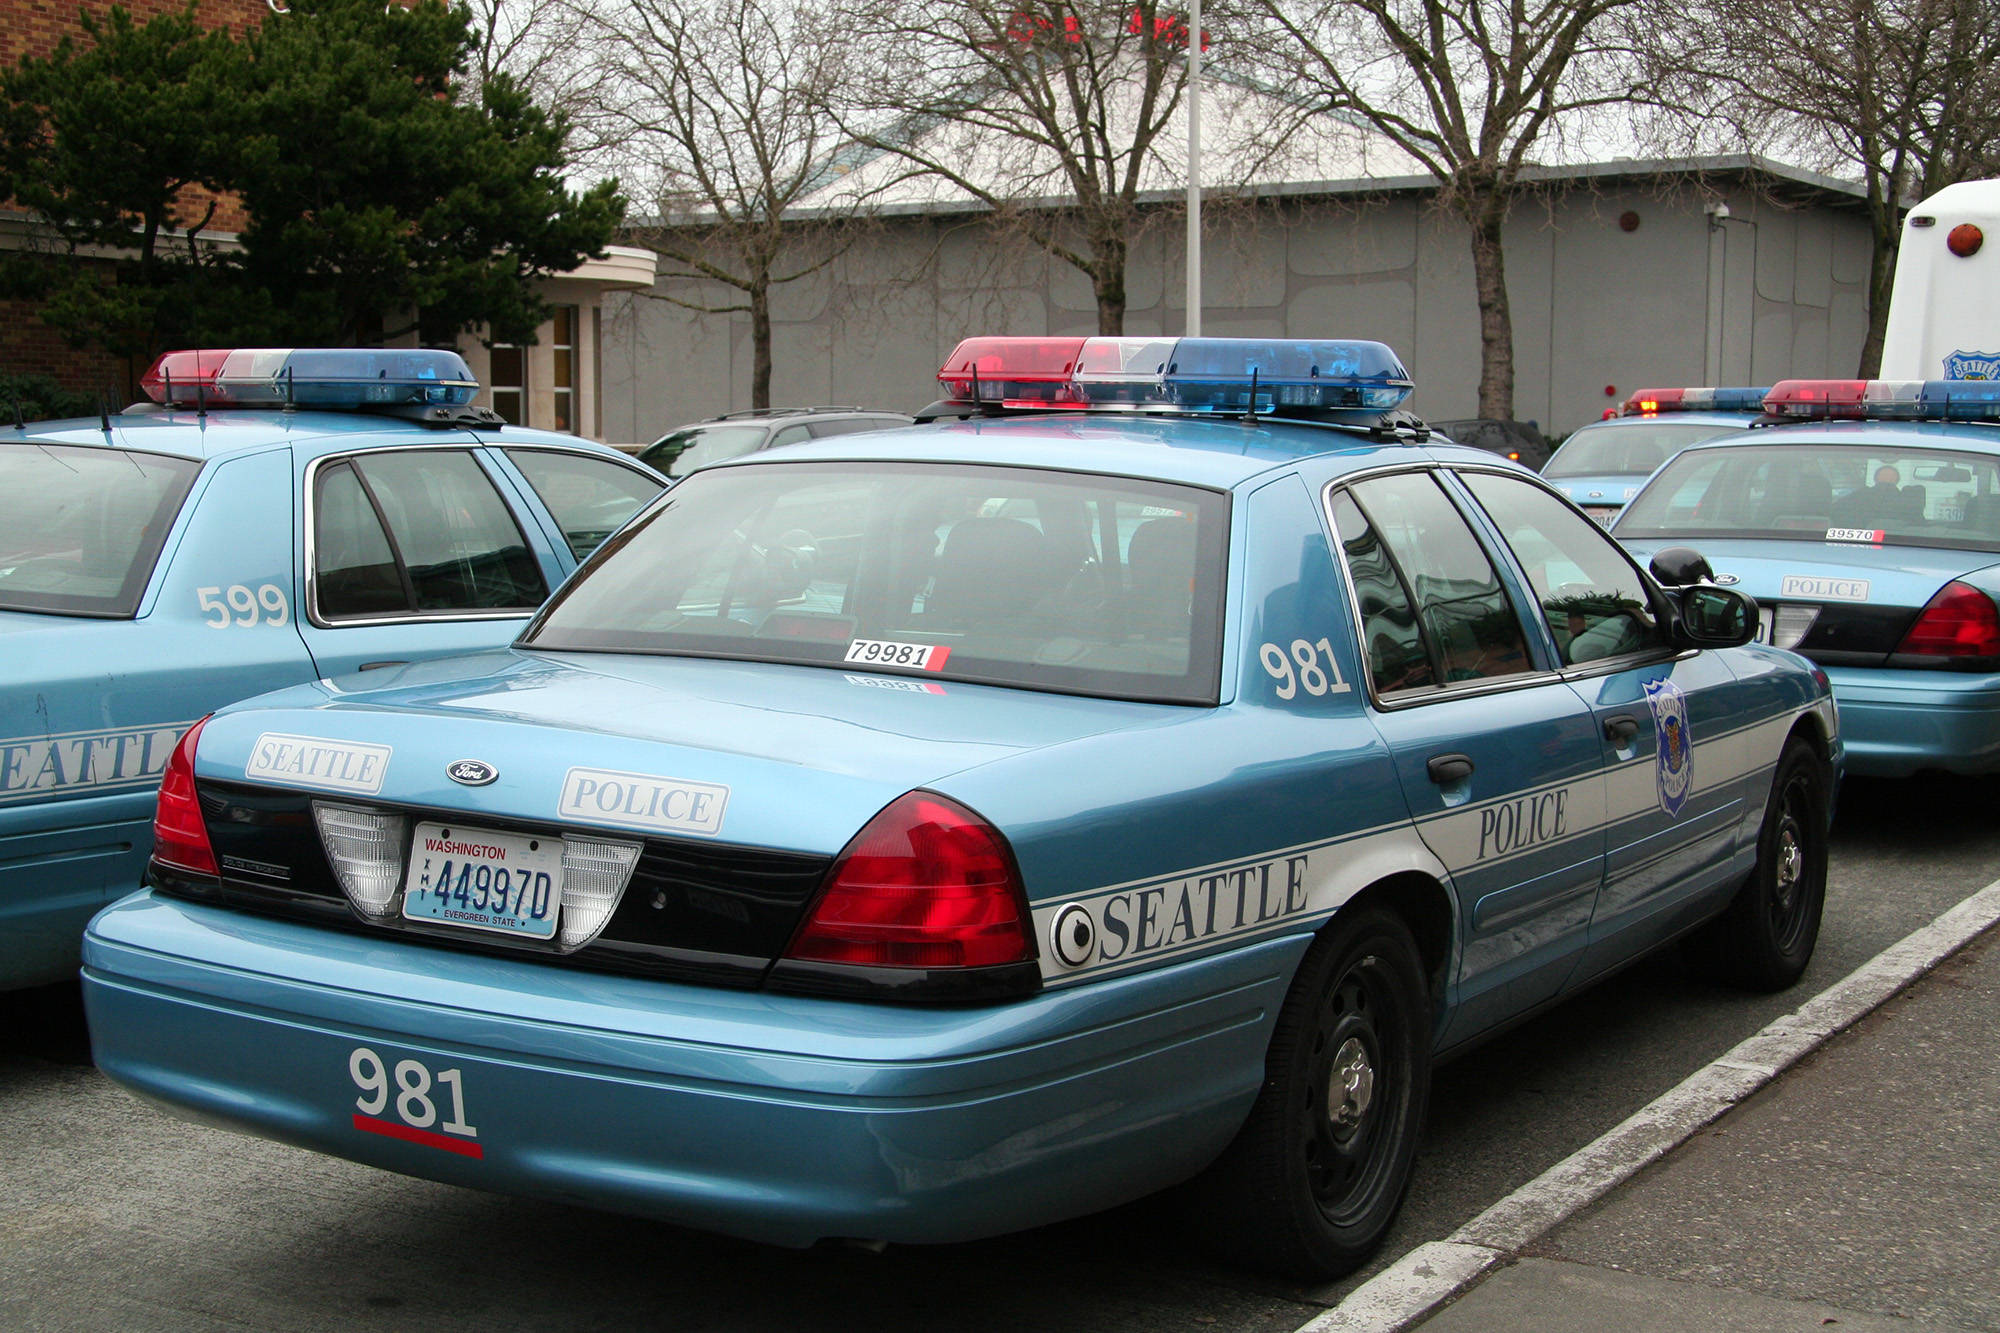 Seattle police car. Photo by Dmitri Fedortchenko/Flickr Creative Commons.